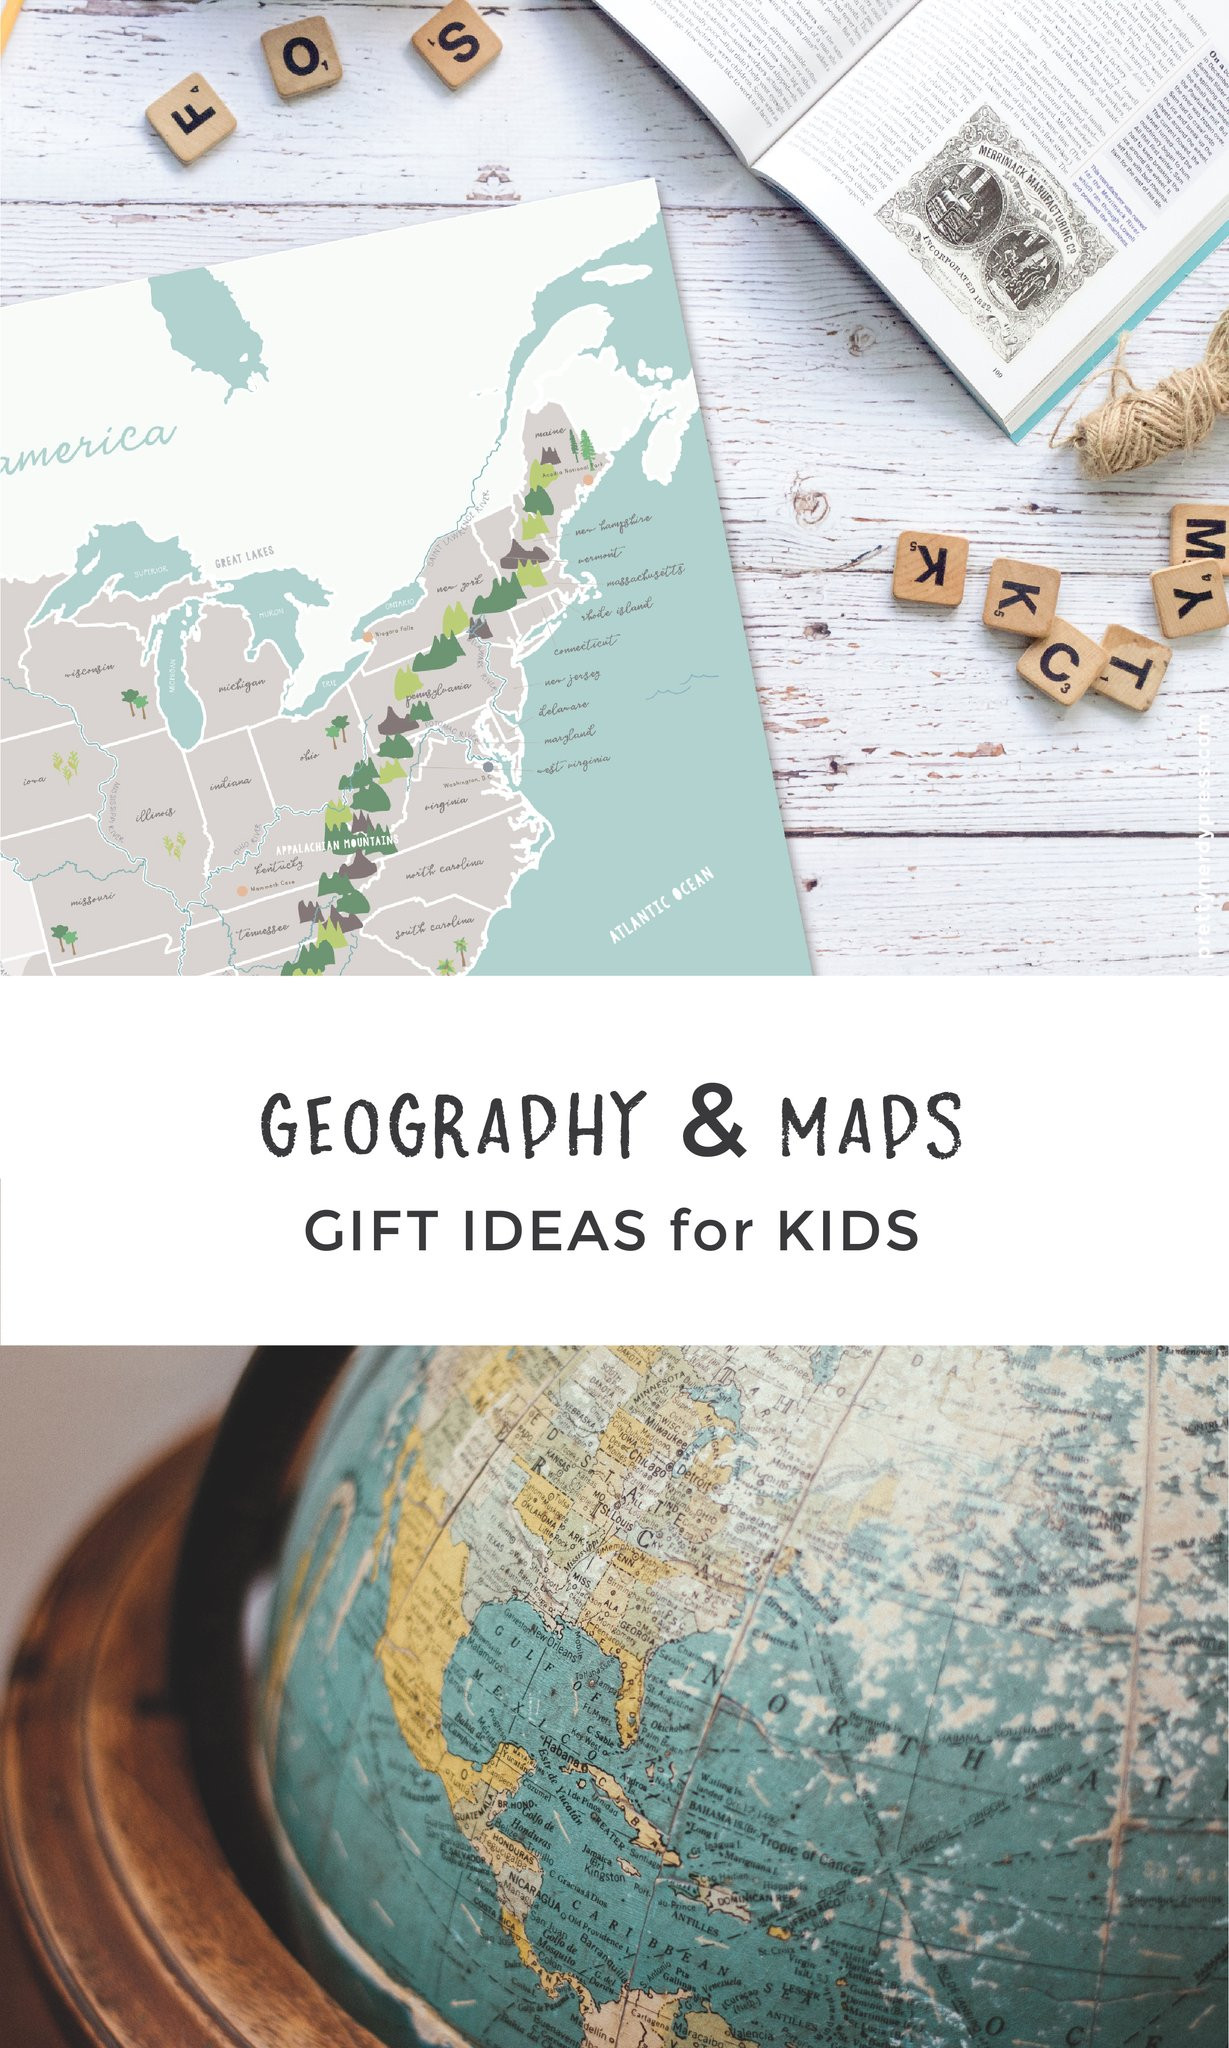 Geography Gifts For Kids
 12 Beautiful Gifts for Kids that Love Geography & Maps